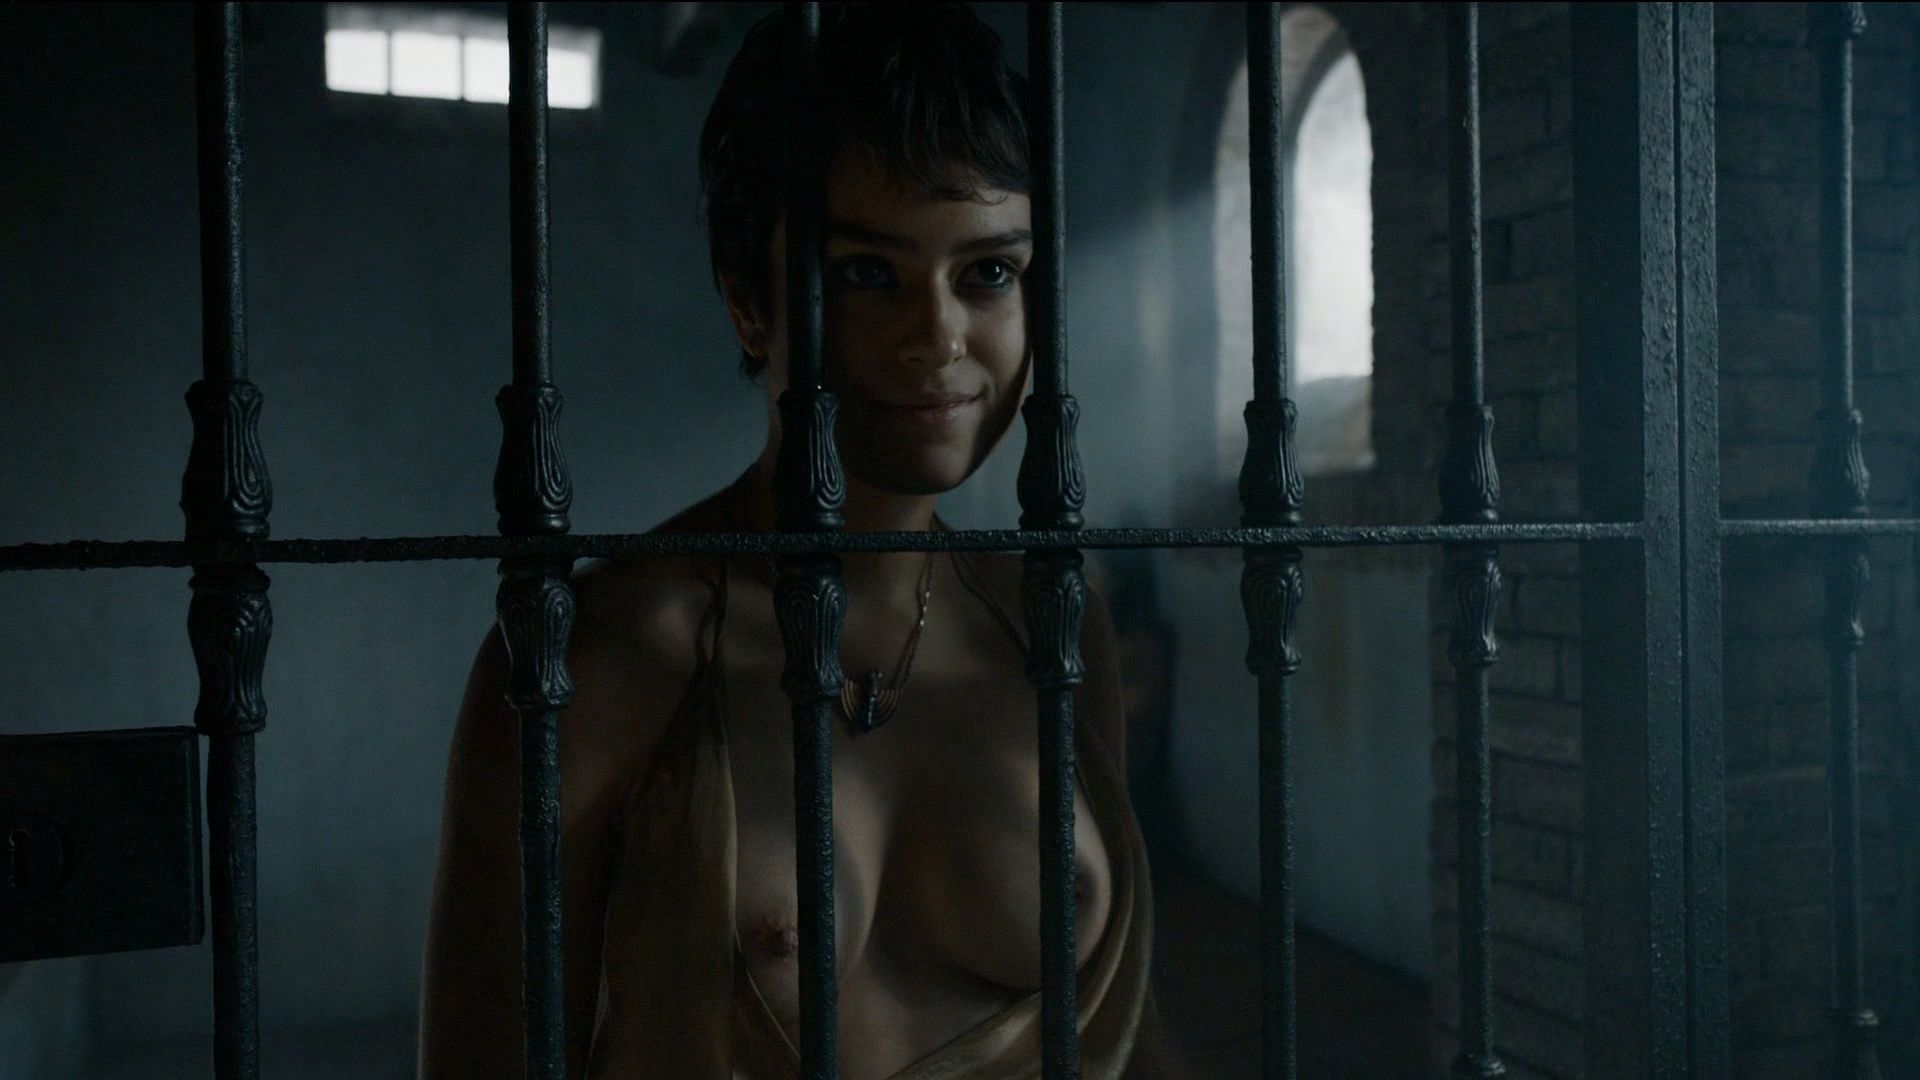 Rosabell Laurenti Sellers Nude – Game of Thrones (2015) s05e07 – HD 1080p